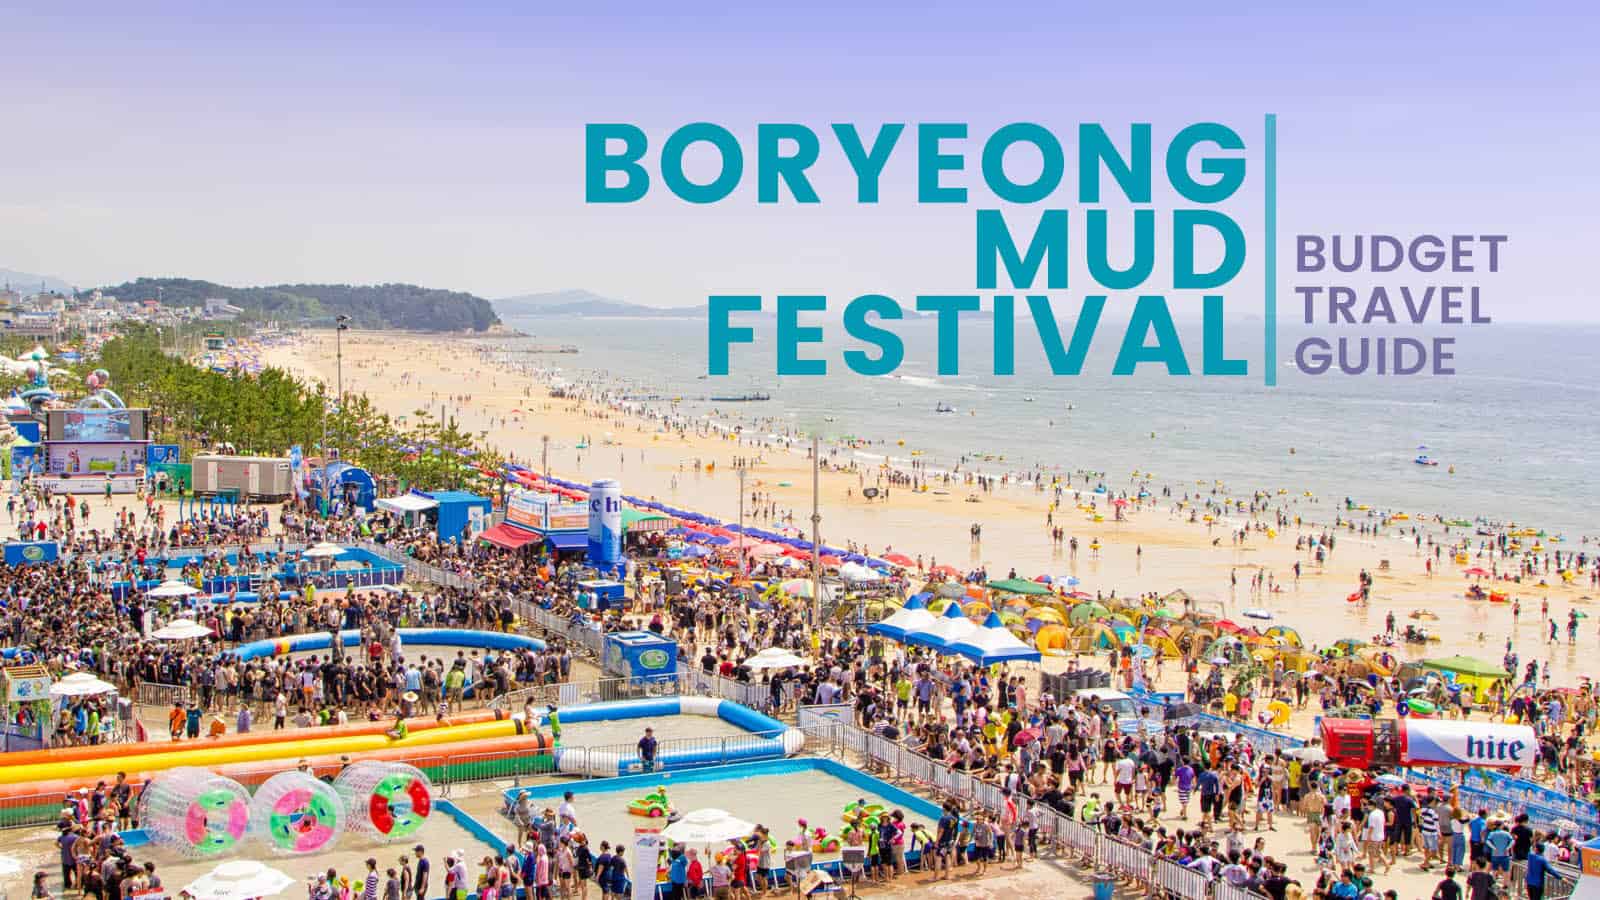 BORYEONG MUD FESTIVAL: Budget Travel Guide & Itinerary